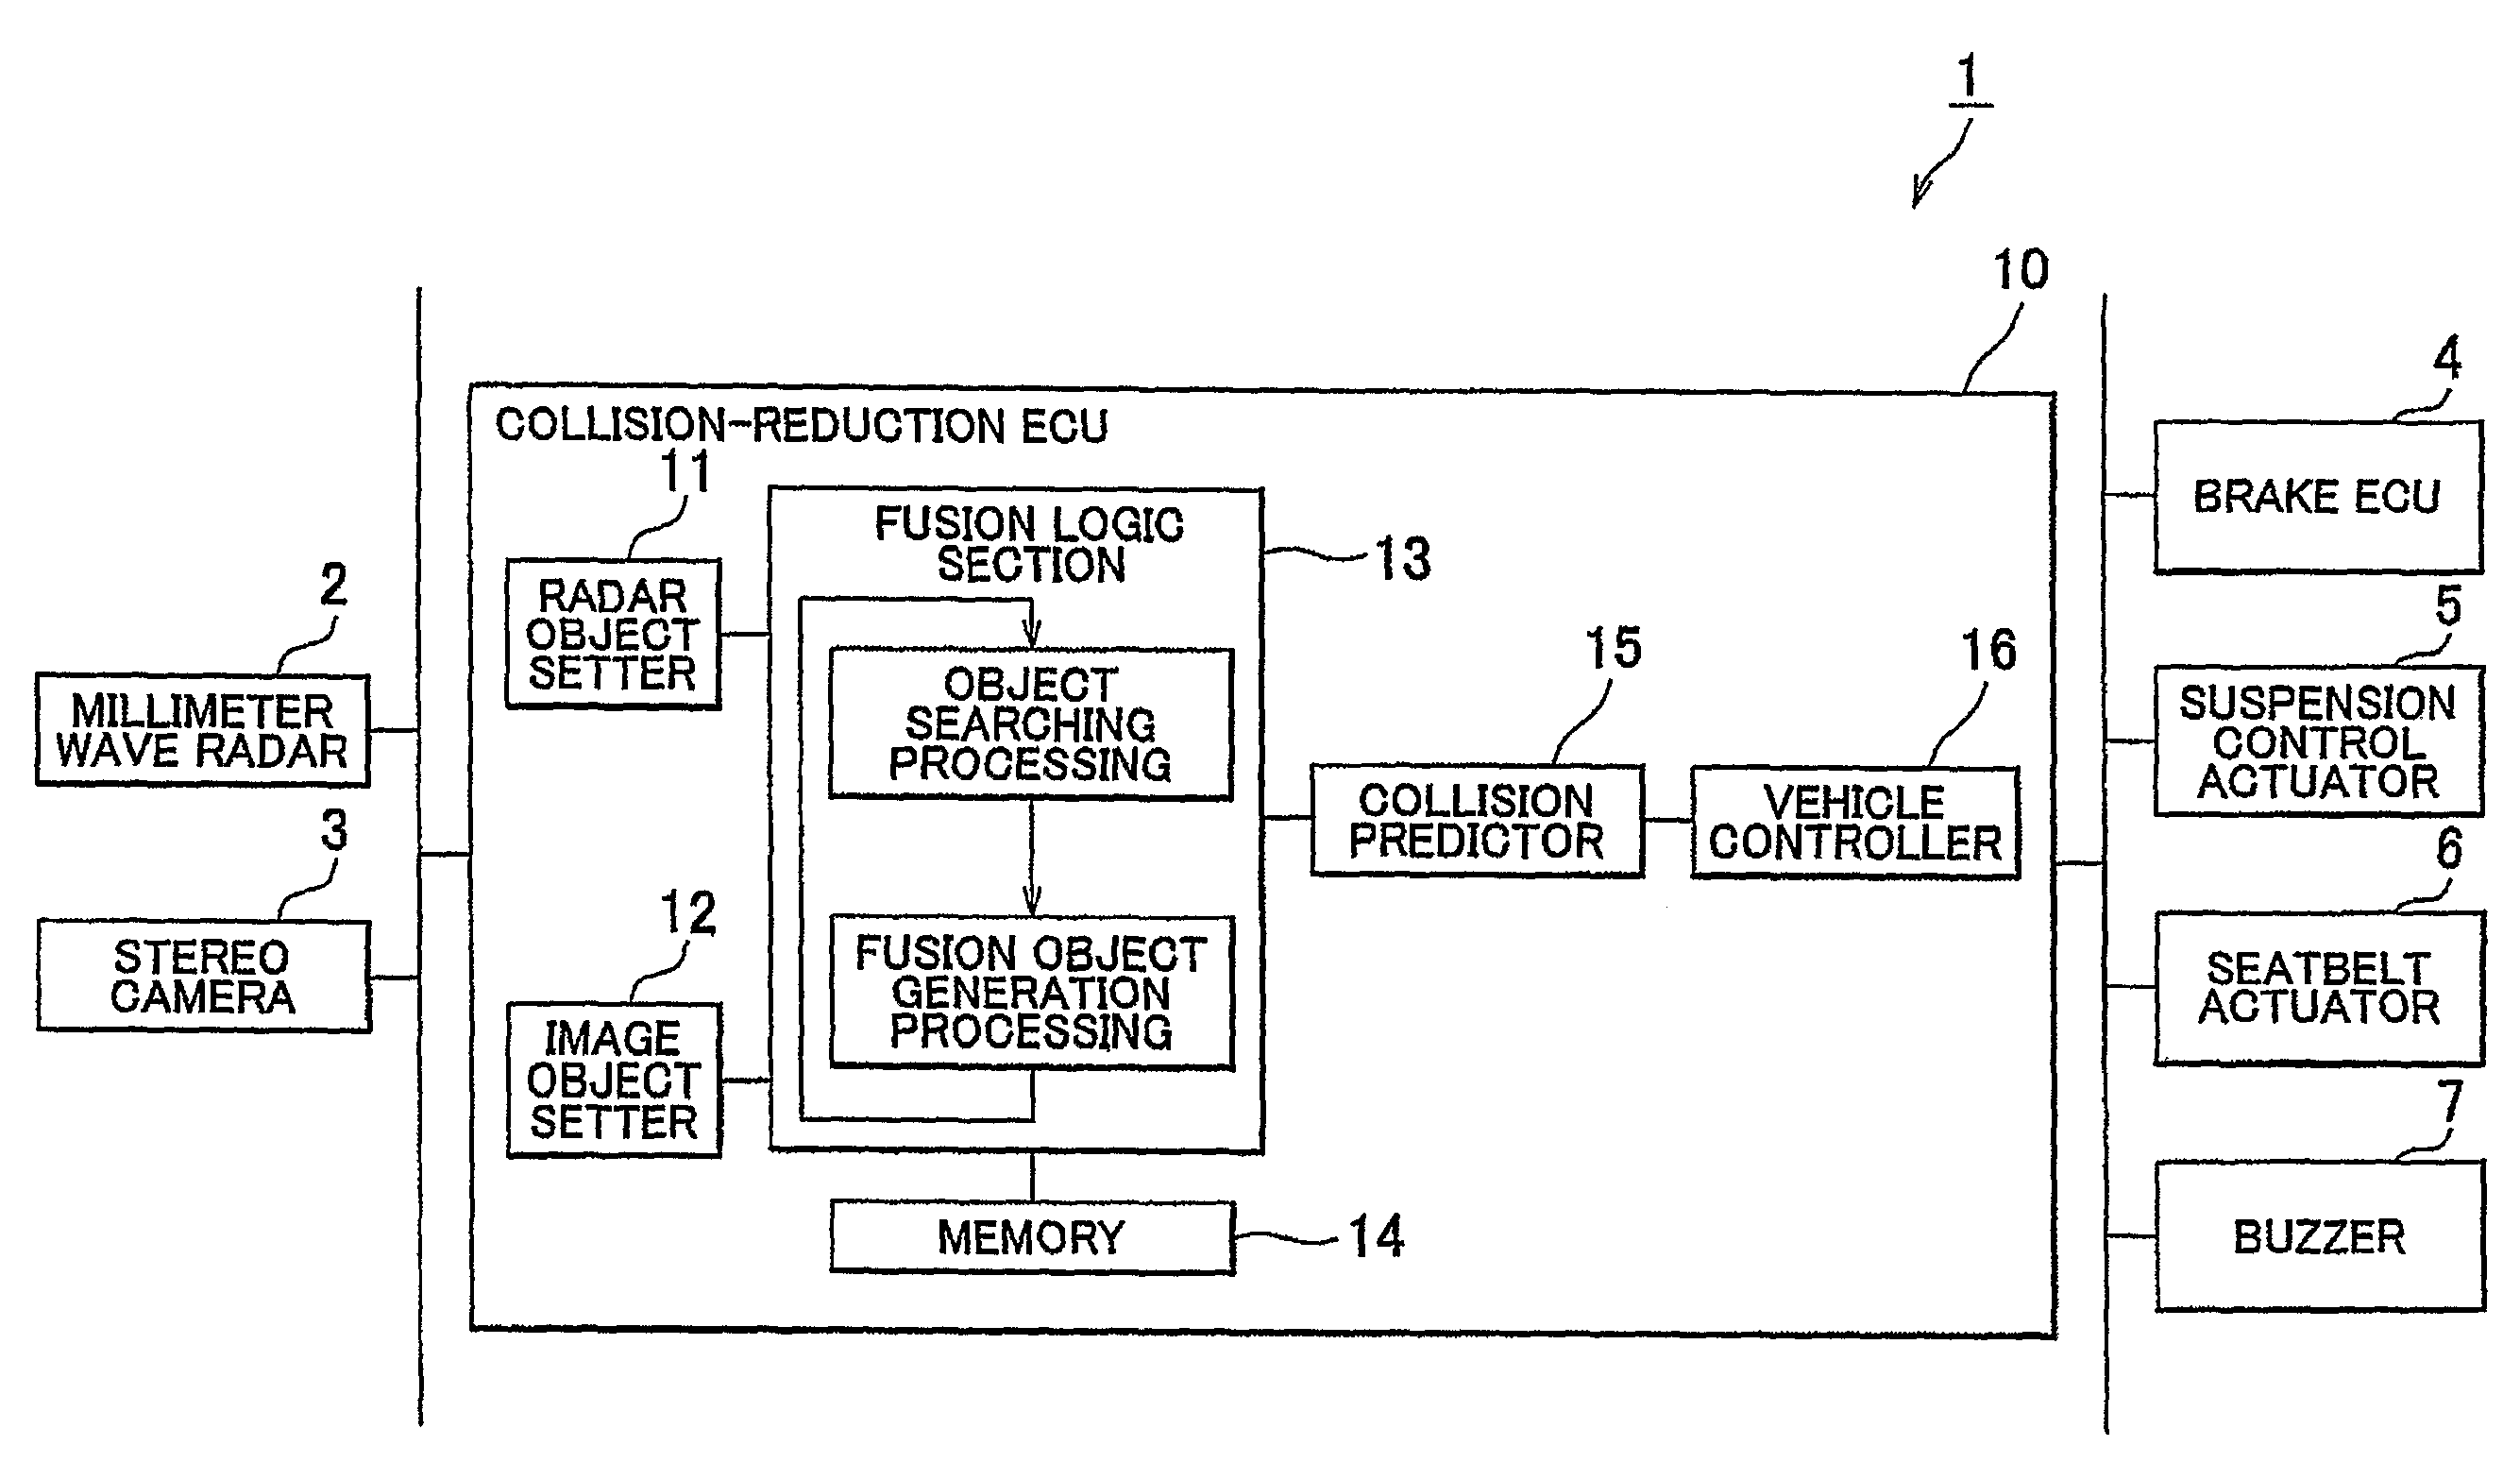 Object detecting apparatus and method for detecting an object